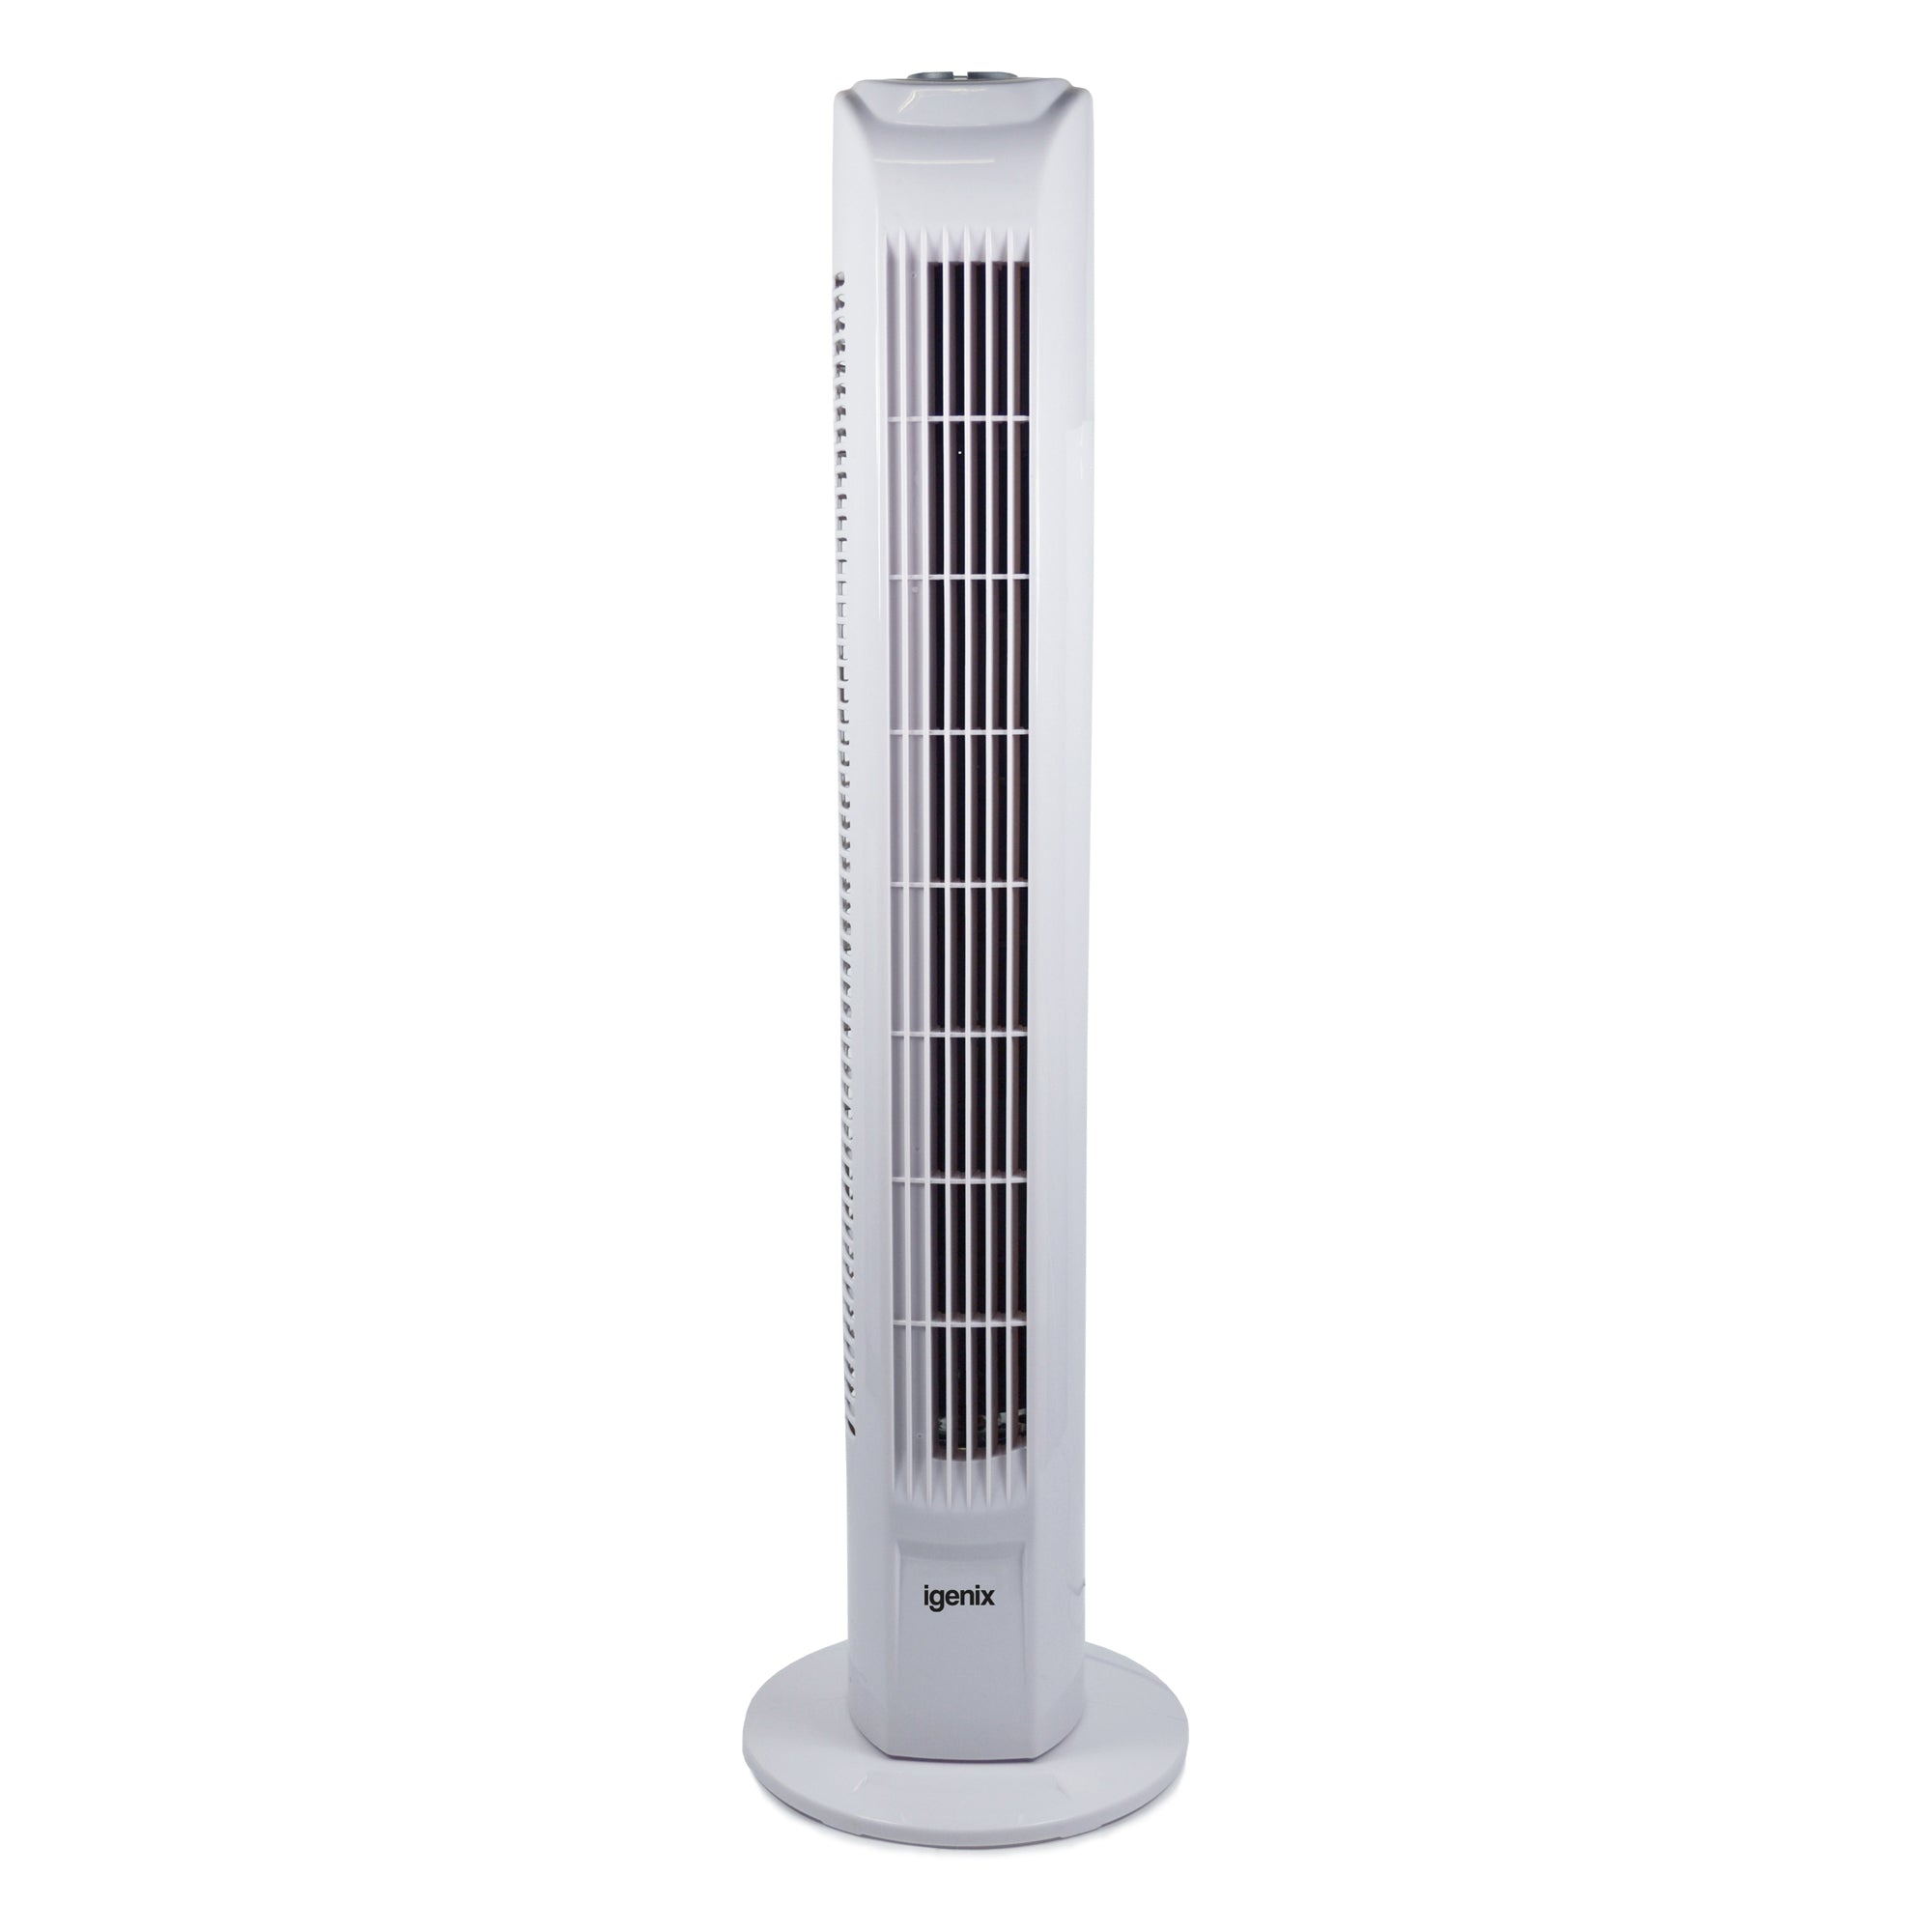 Tower Fan, Oscillating, 7.5 Hour Timer, 29 Inch, White